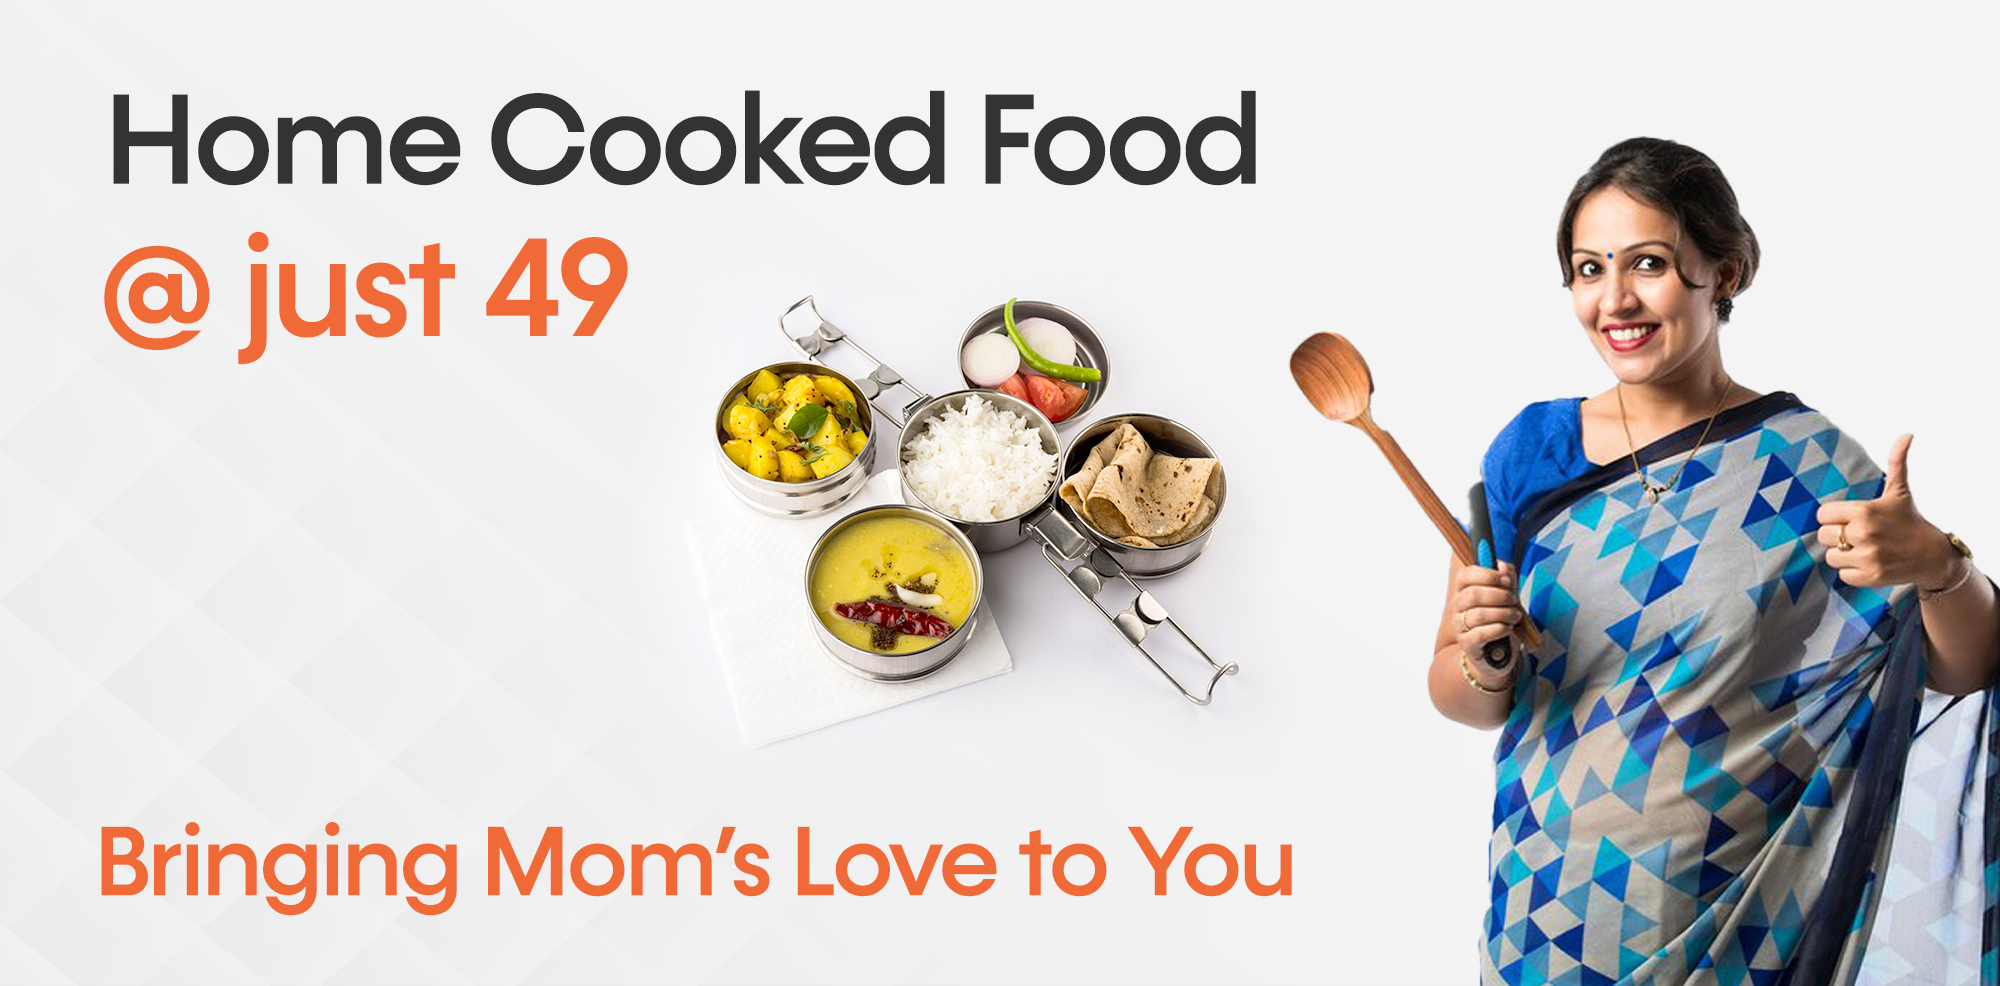 Home Cooked Food @ just 49: Bringing Mom’s Love to You